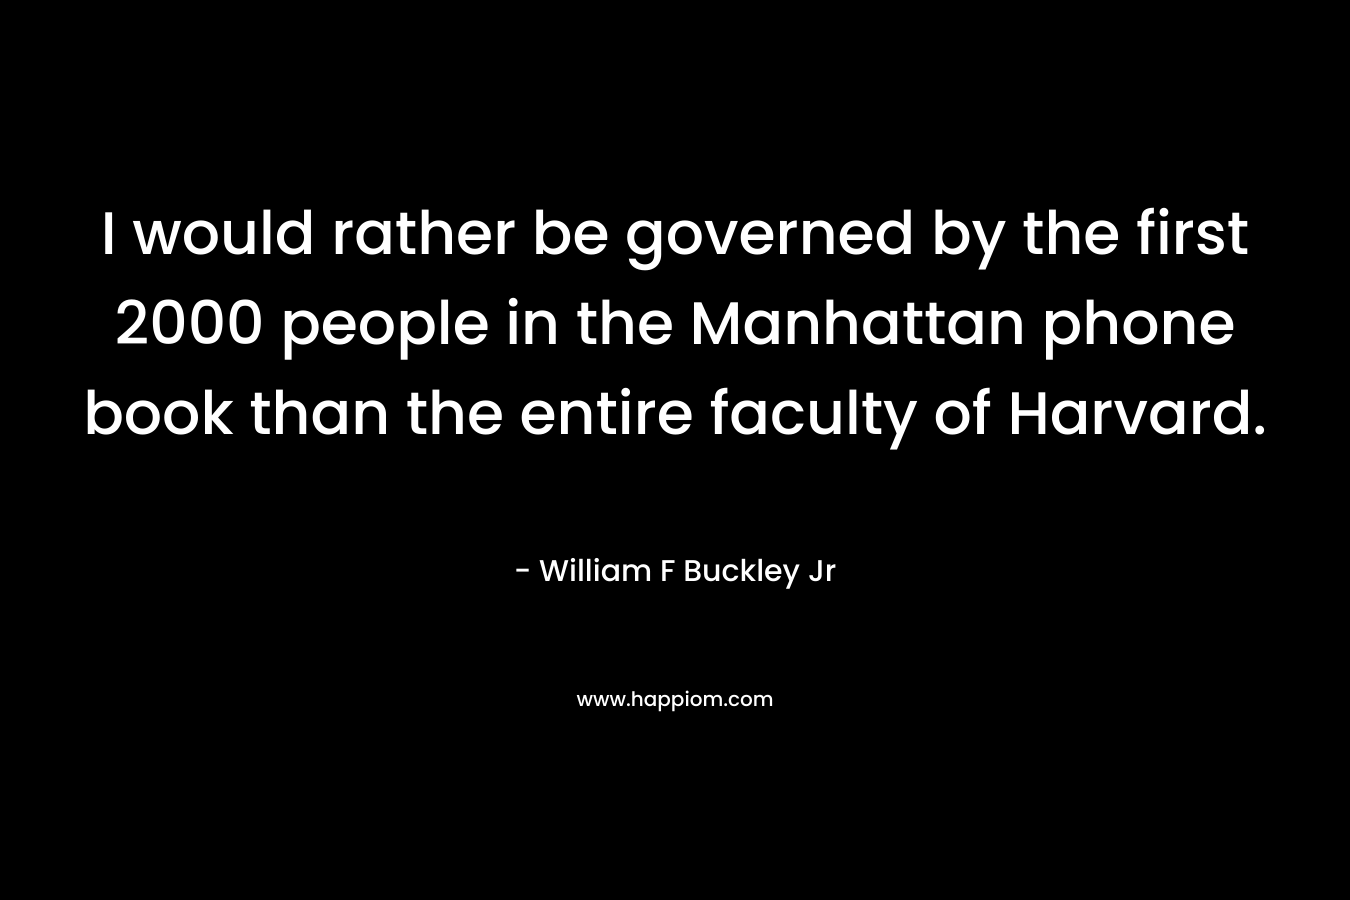 I would rather be governed by the first 2000 people in the Manhattan phone book than the entire faculty of Harvard.